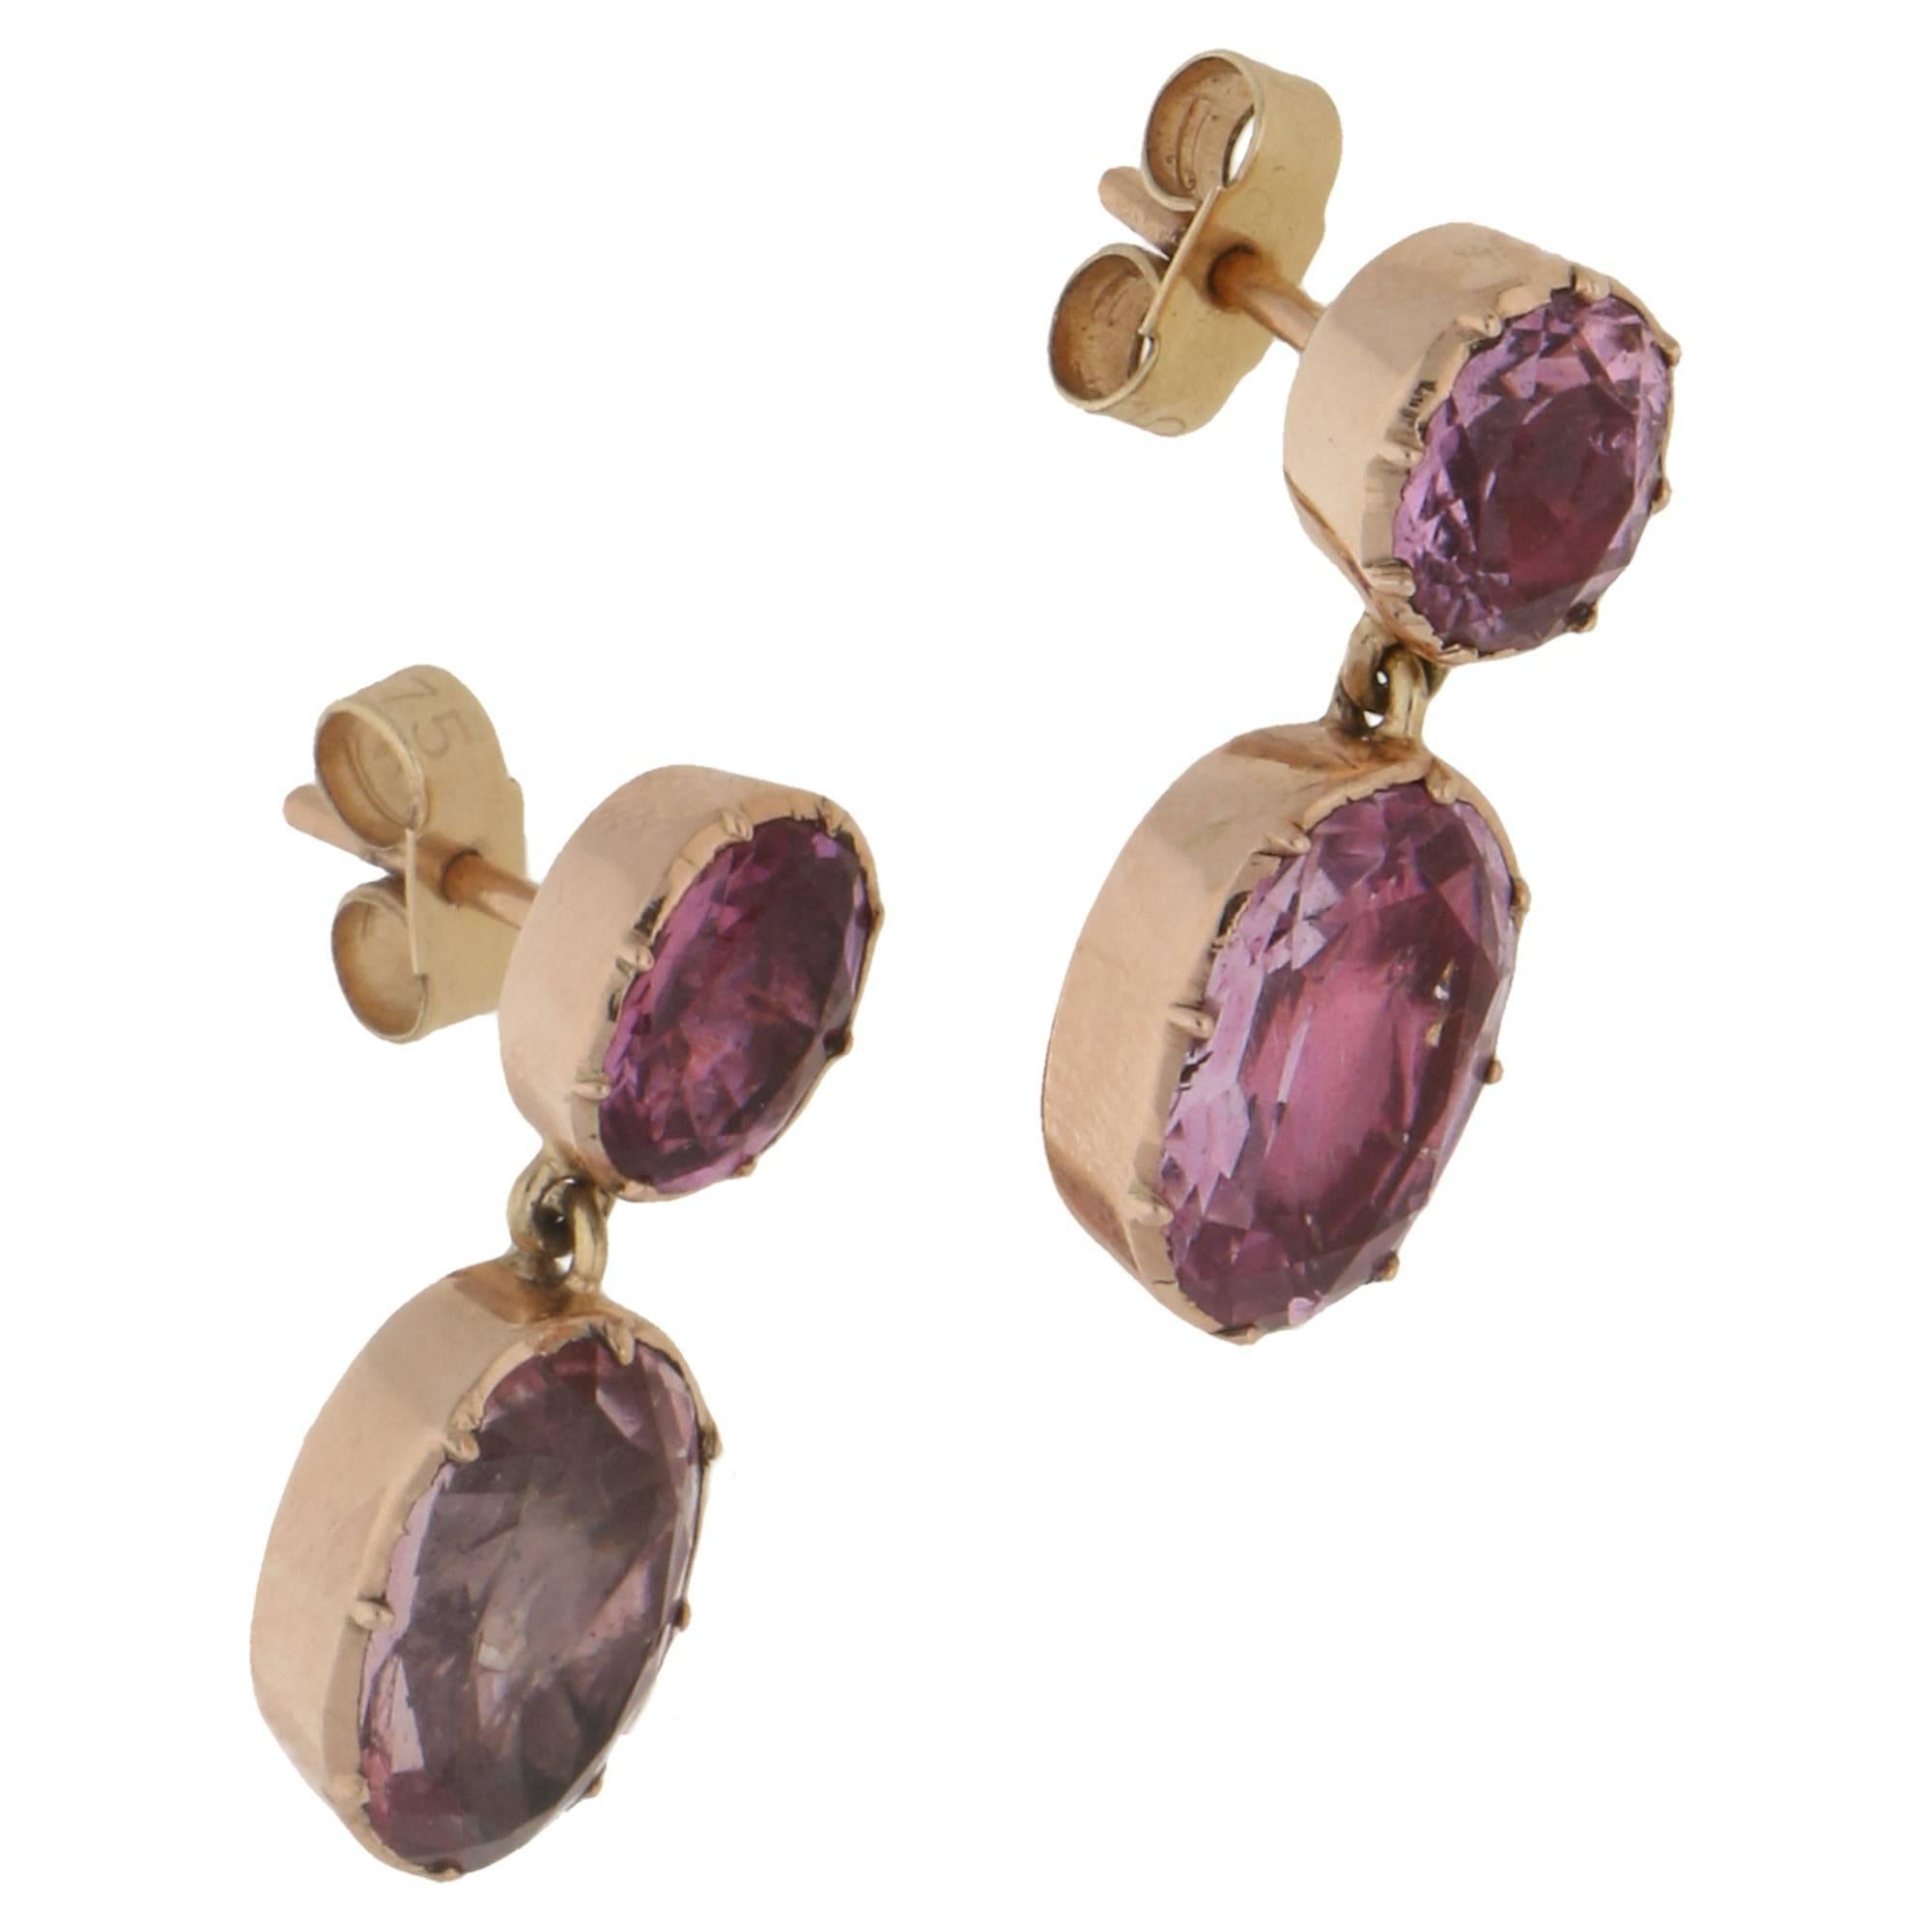 A pair of early Victorian pink topaz drop earrings. The earrings which date from around 1850 are comprised of two foil backed oval cut topaz stones, one suspended underneath the other. They are each set in a closed back setting with delicate claw